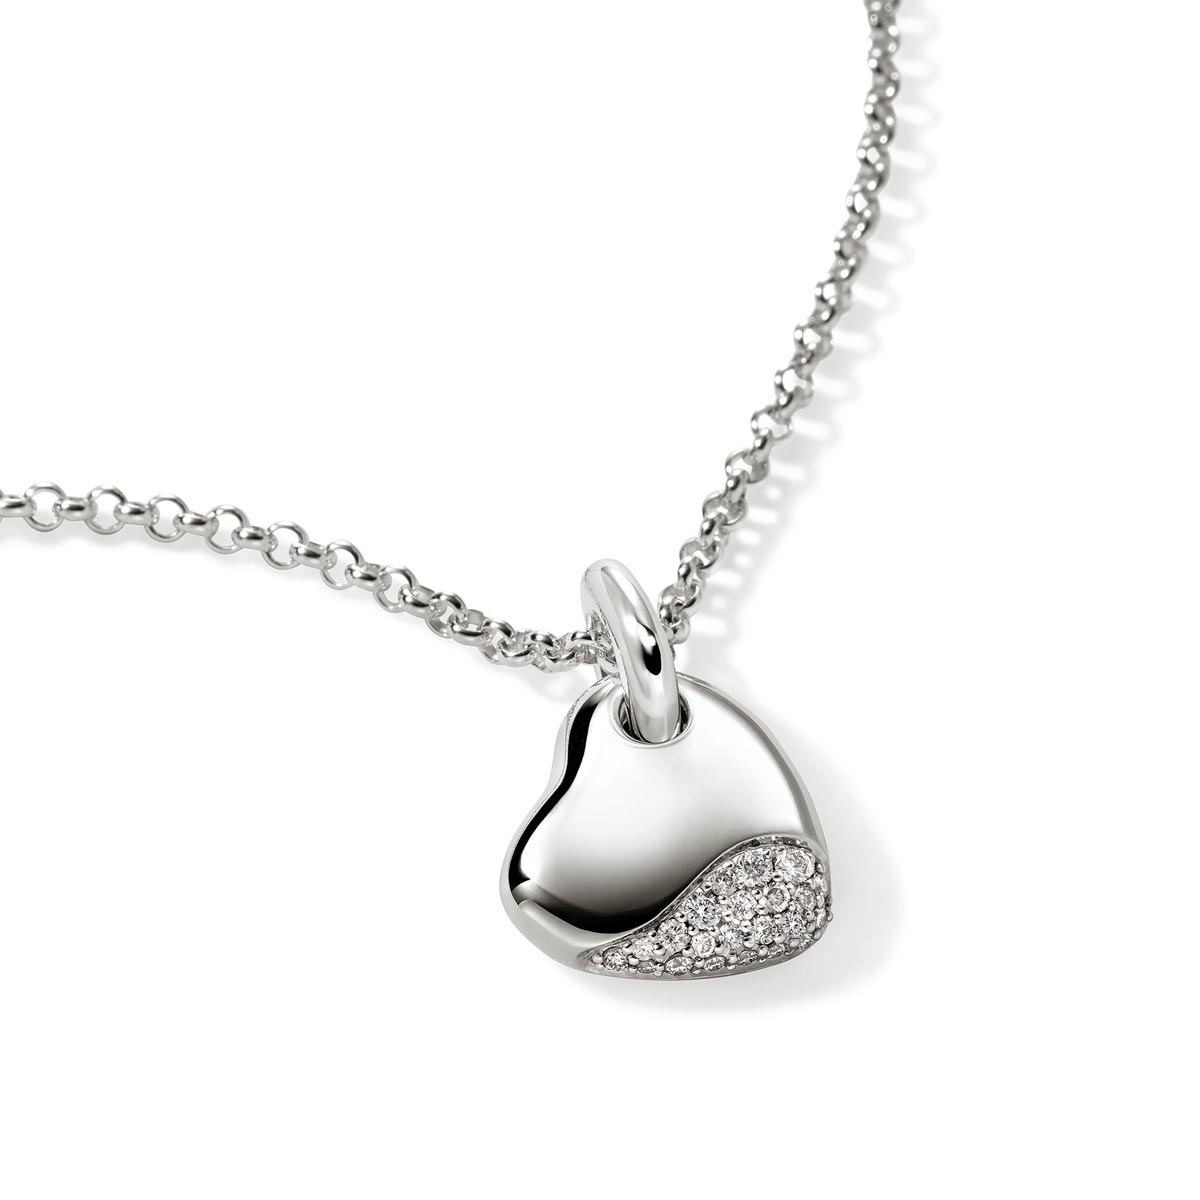 John Hardy Pebble Collection Diamond Heart Necklace in Sterling Silver (1/7ct tw)